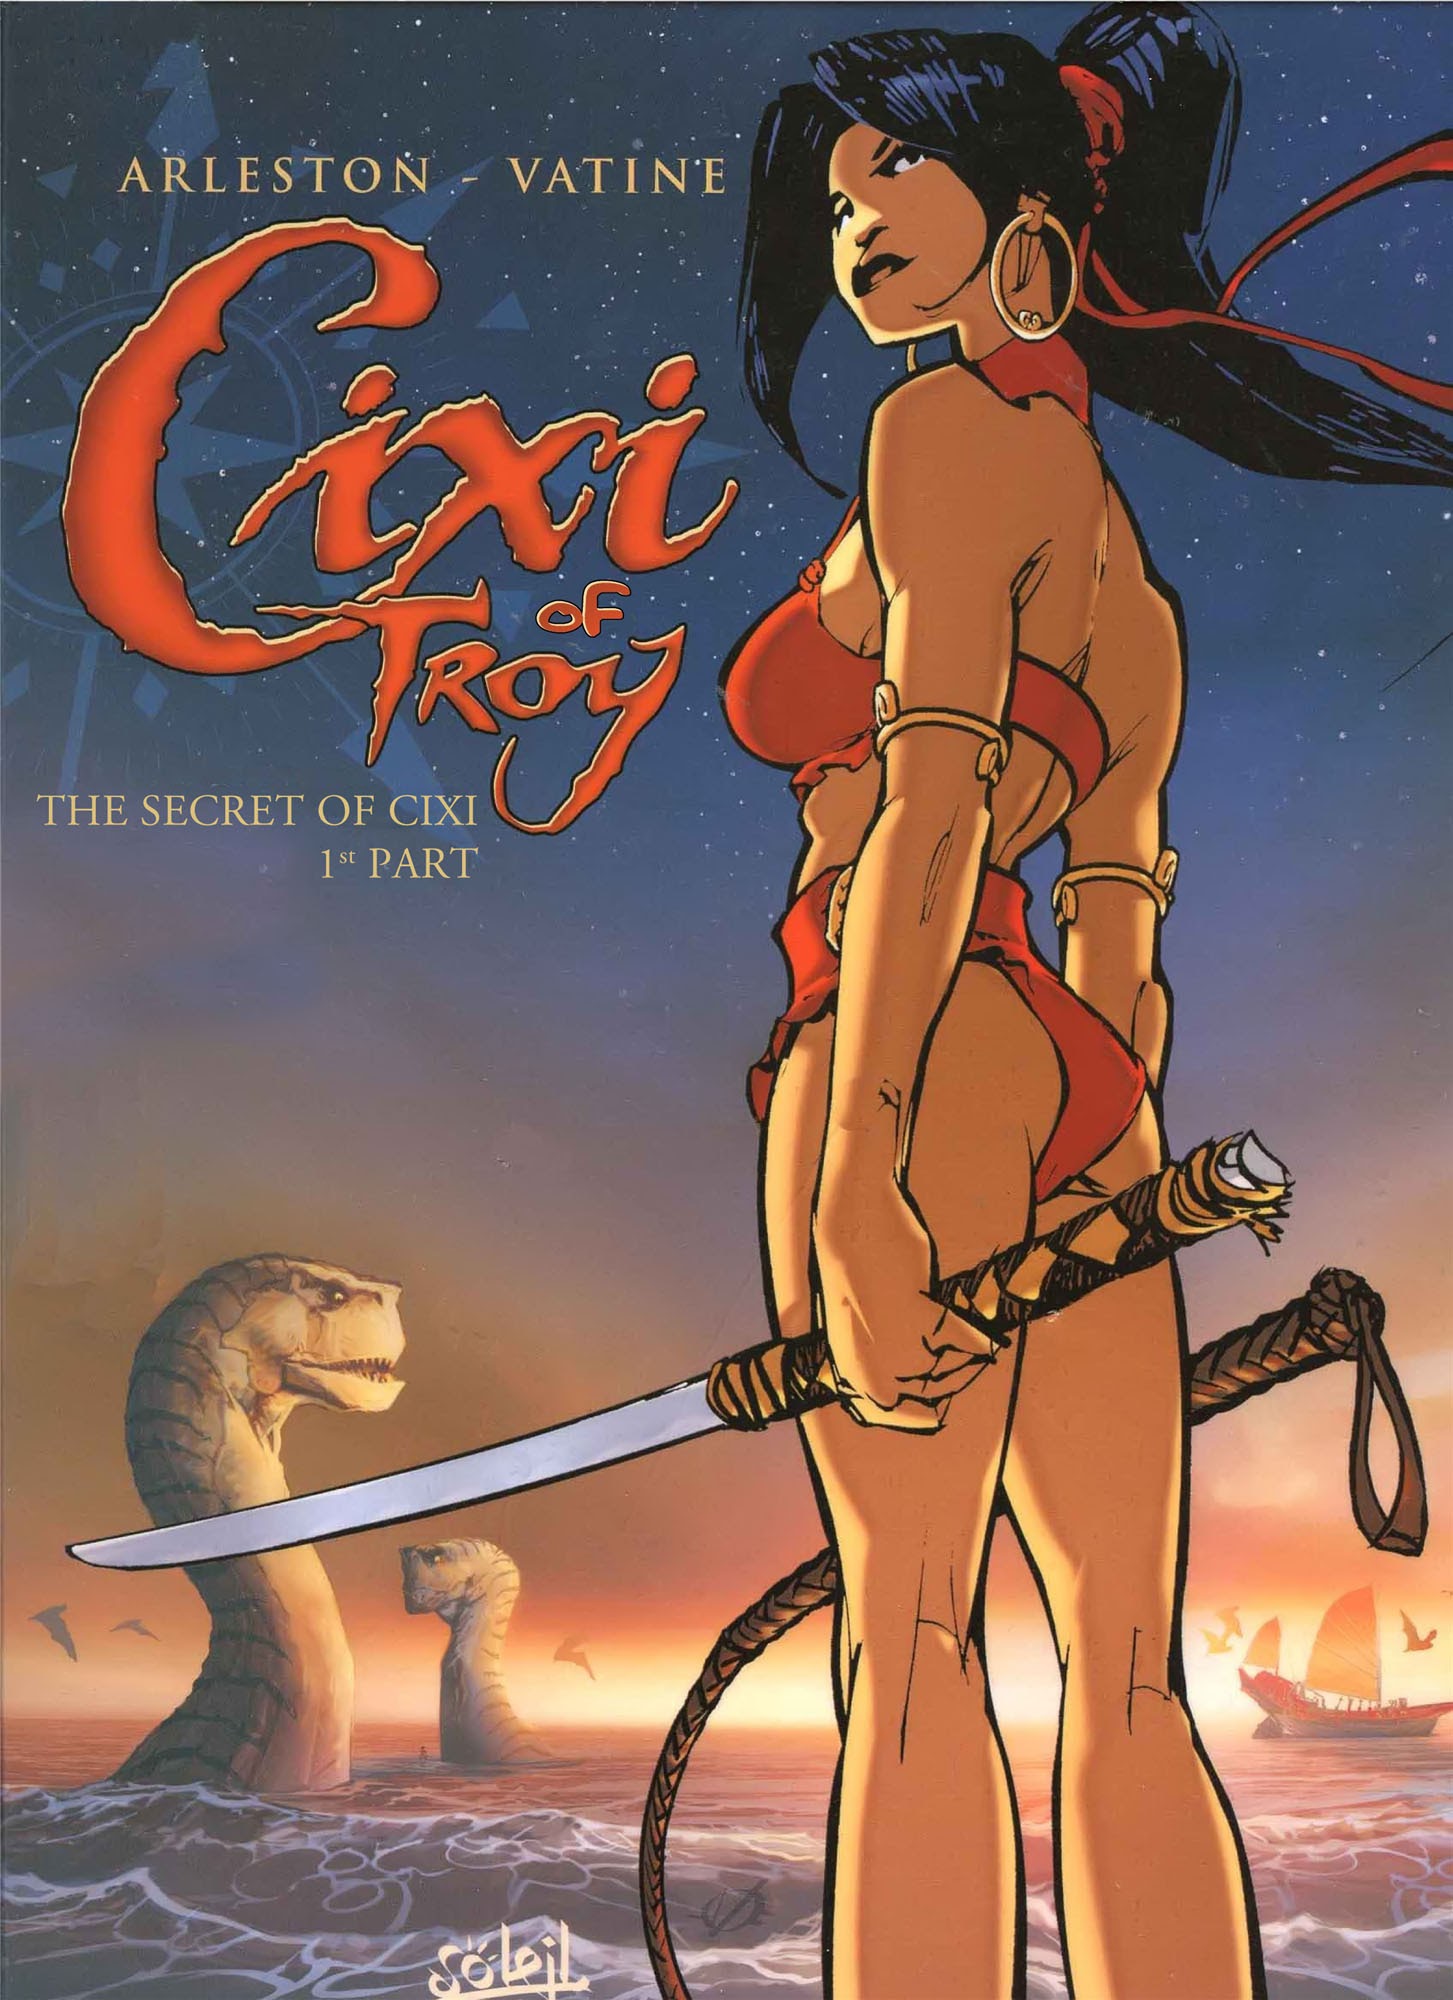 Read online Cixi of Troy comic -  Issue #1 - 1